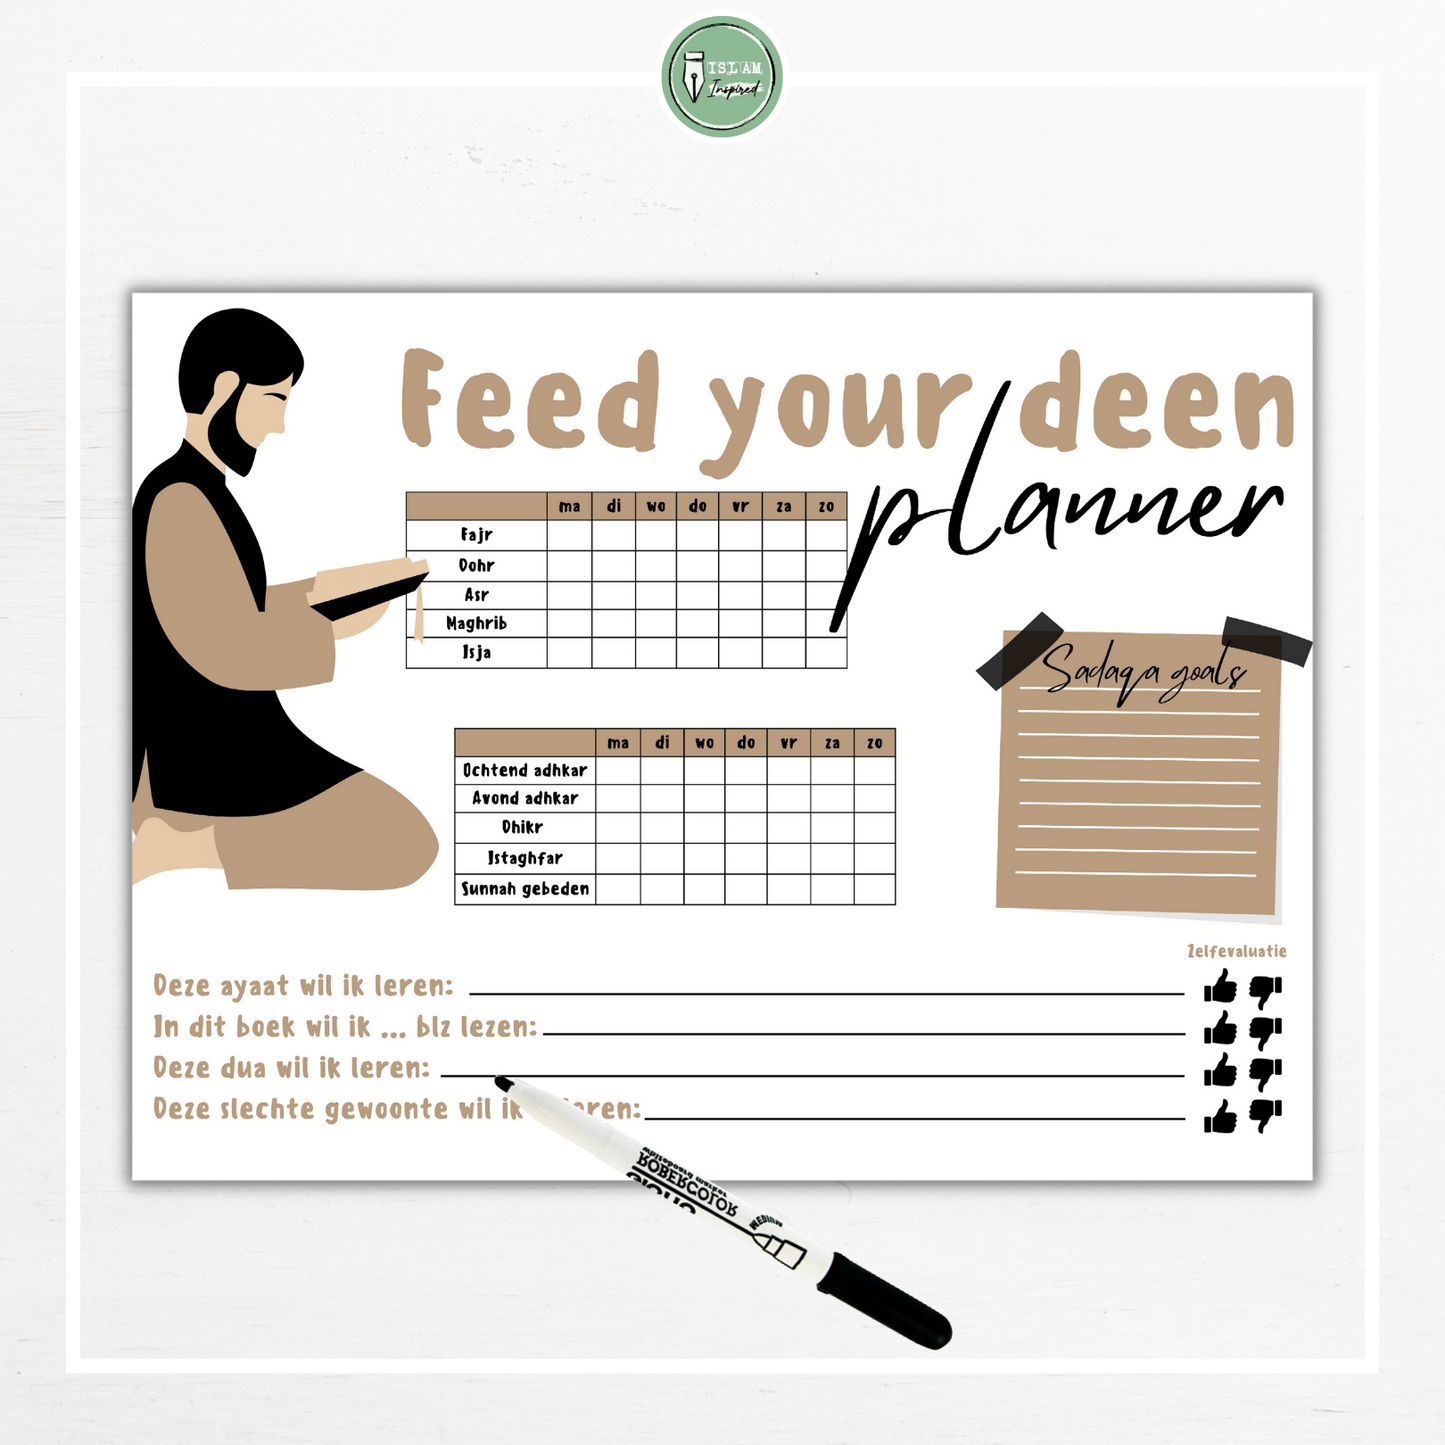 'Feed your deen' planner